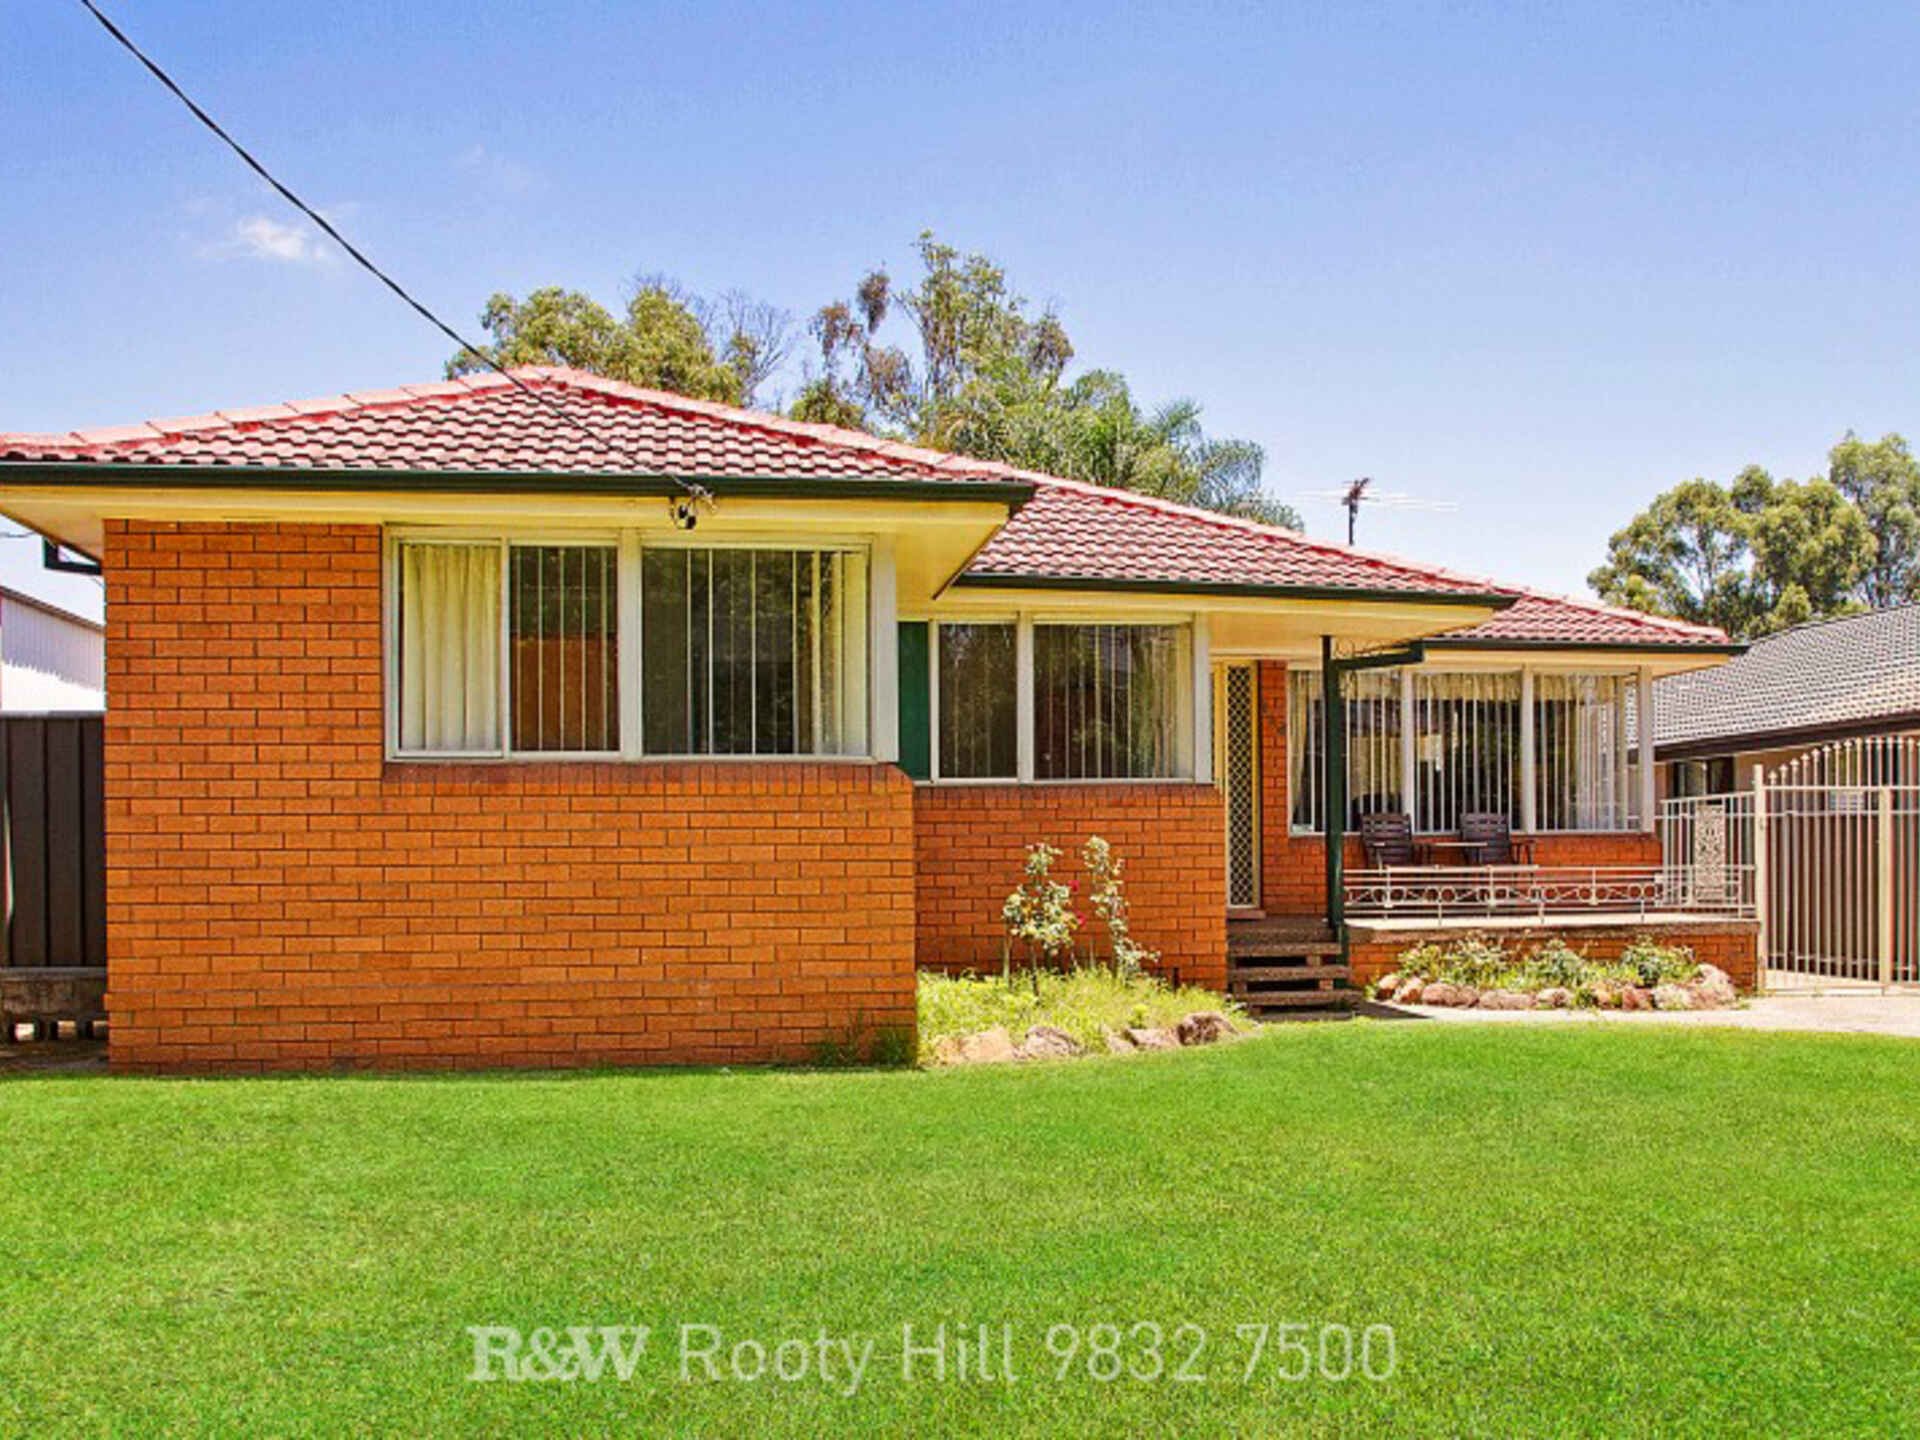 112 Station Street Rooty Hill